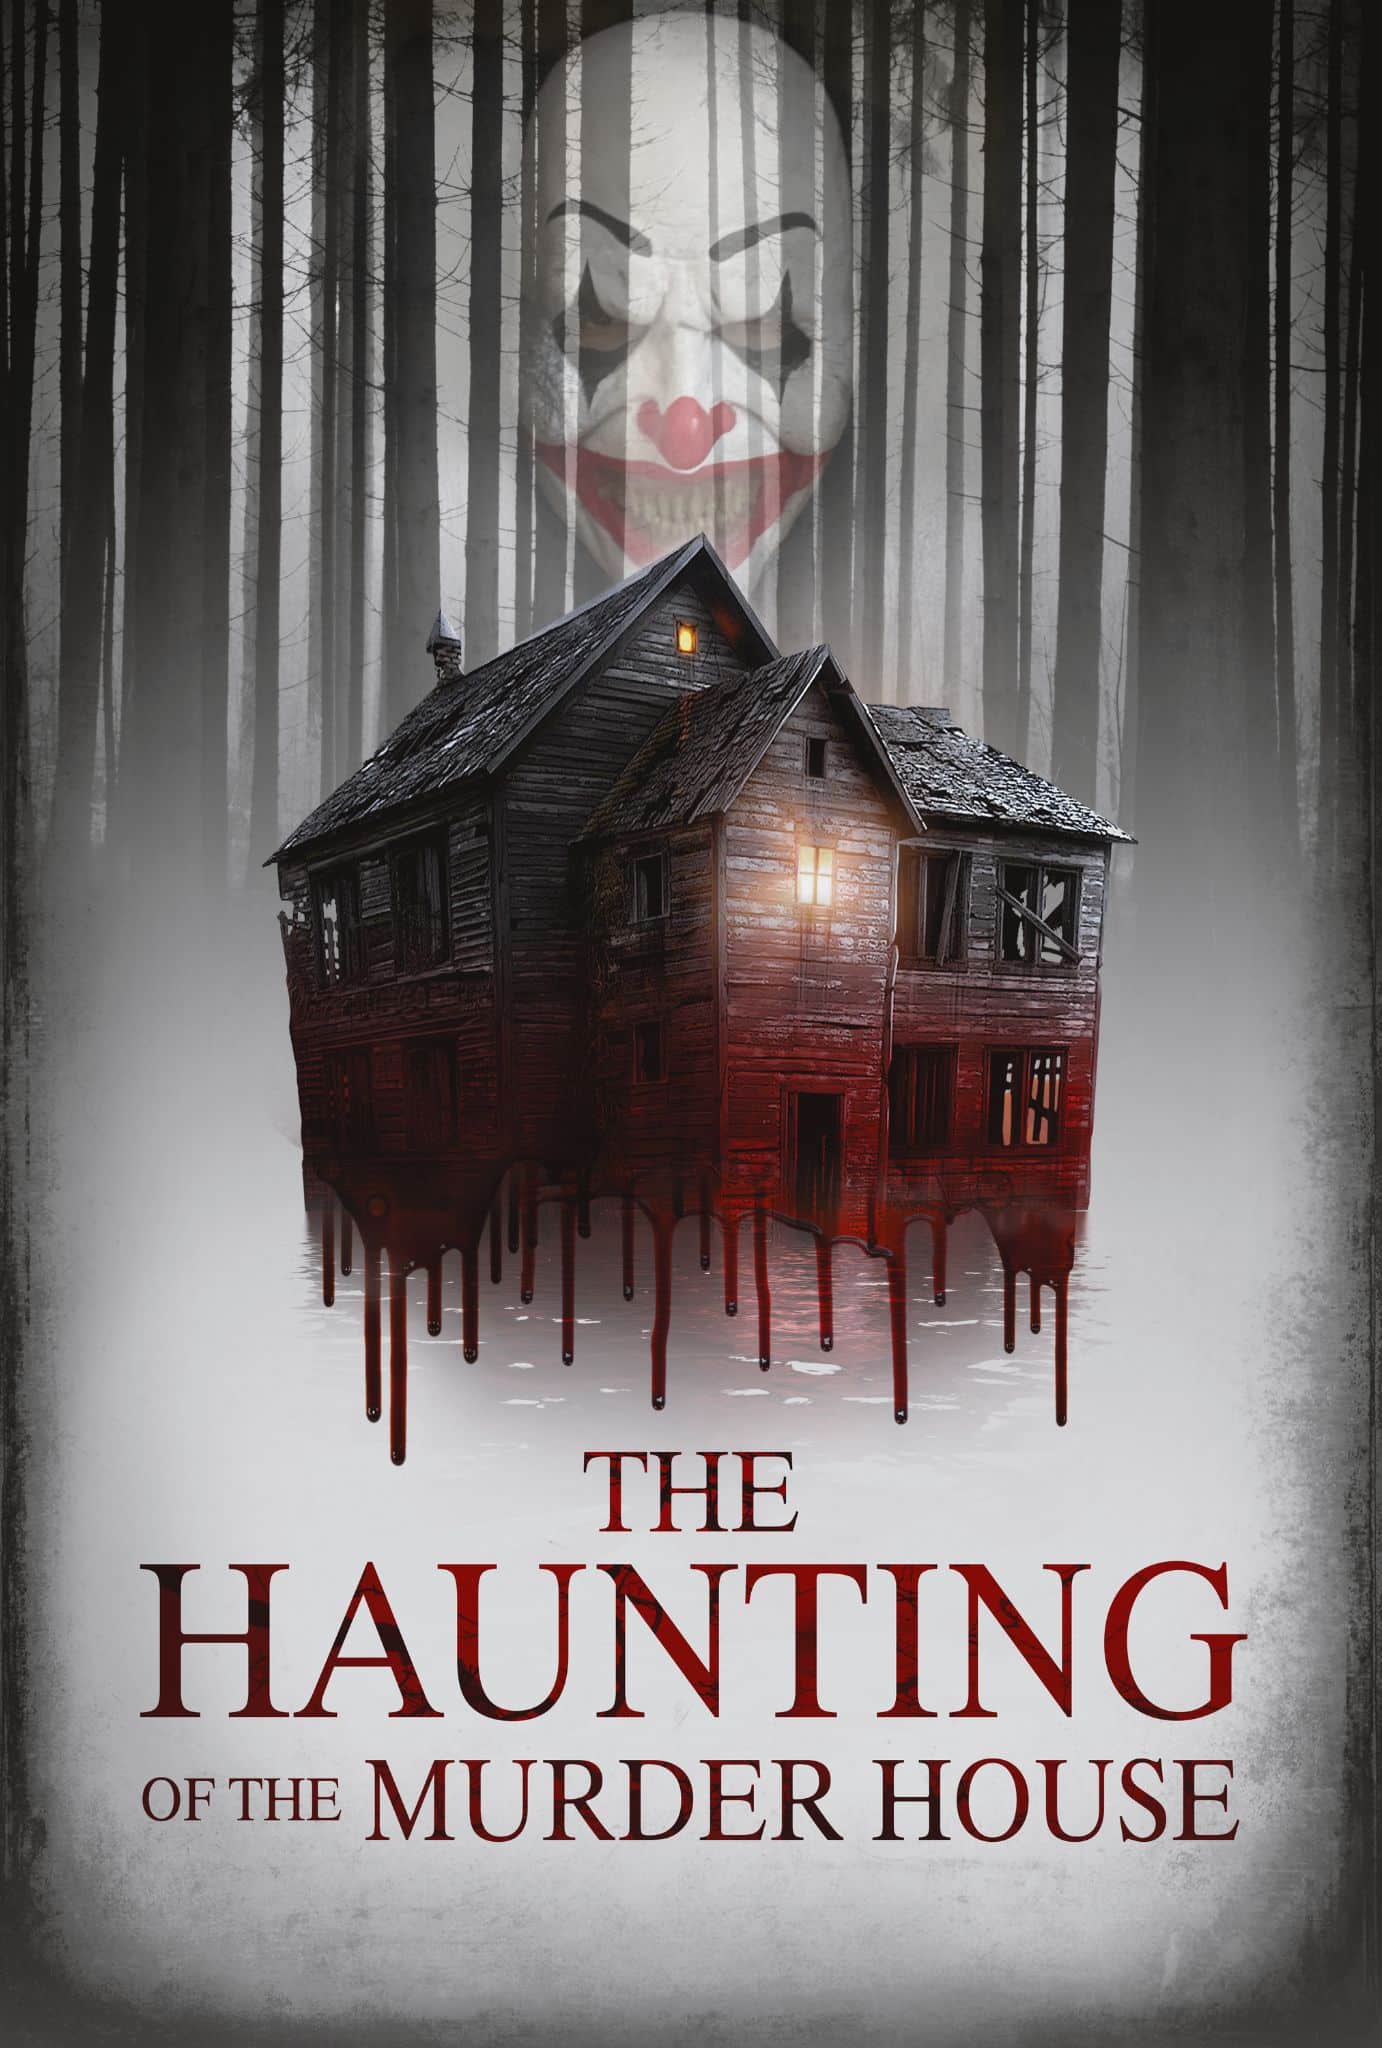 The Haunting of the Murder House – Teaser Poster